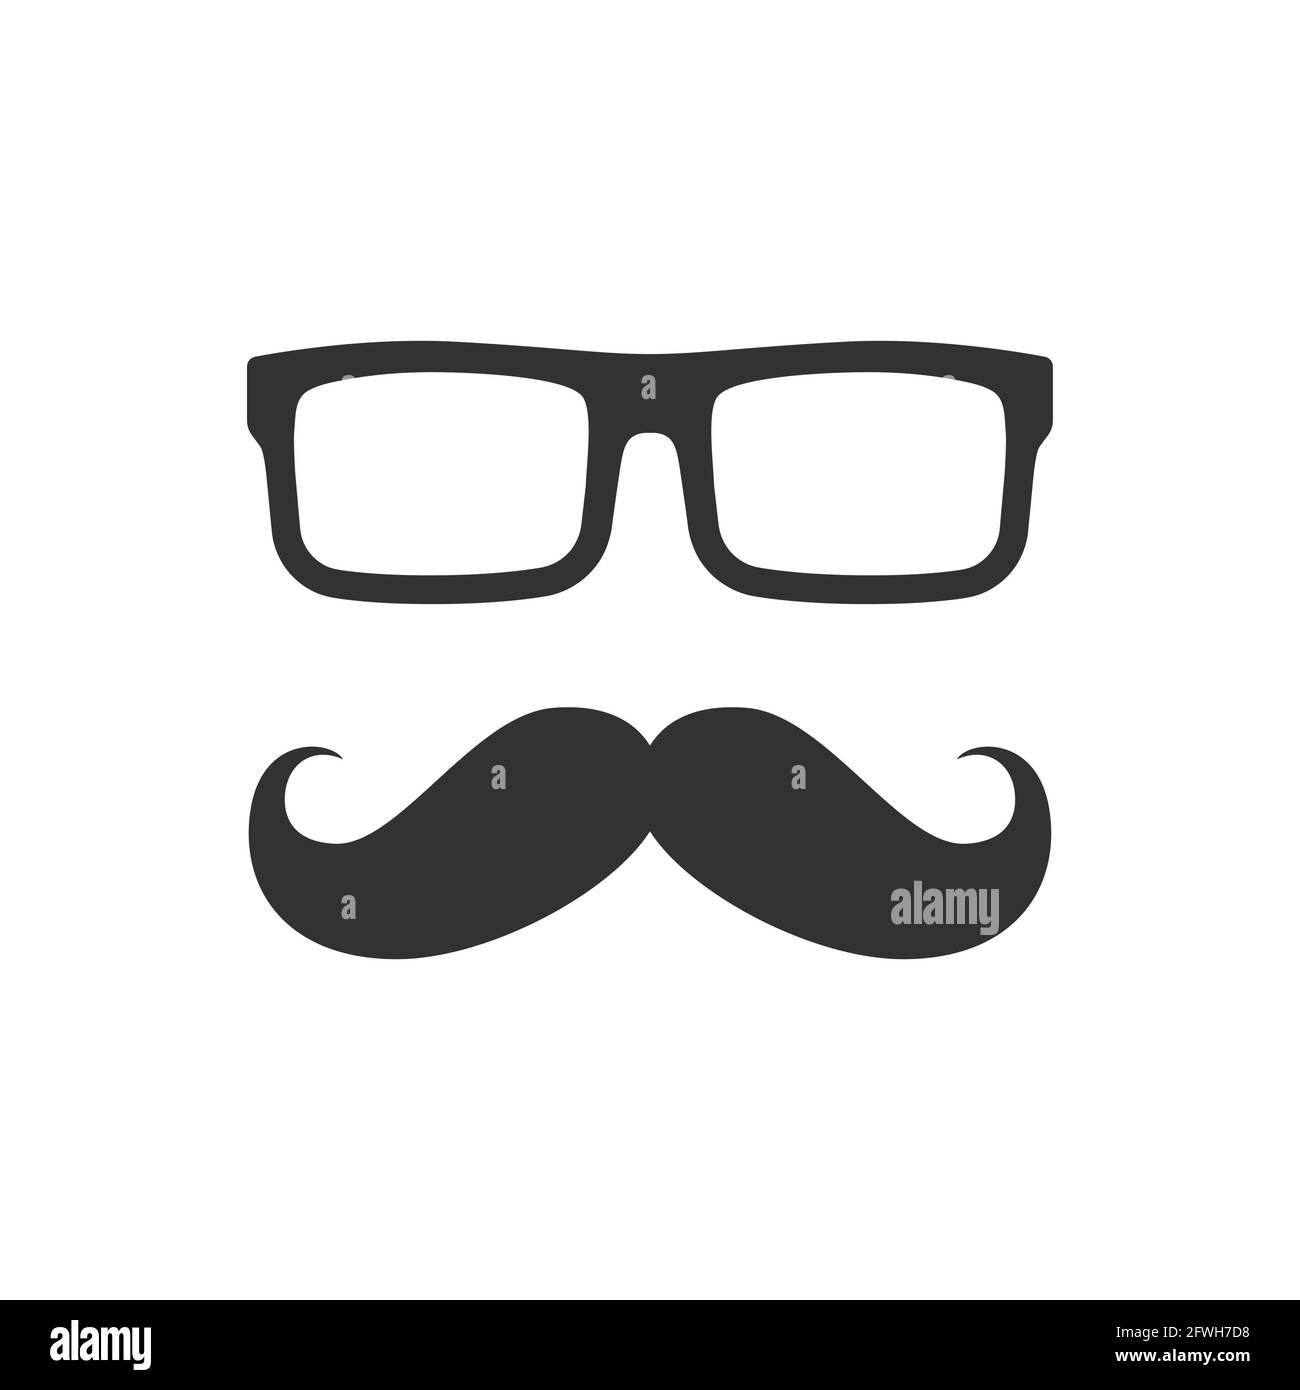 Man mustache and glasses icon. Moustache and glasses, geek or hipster style. Stock Vector